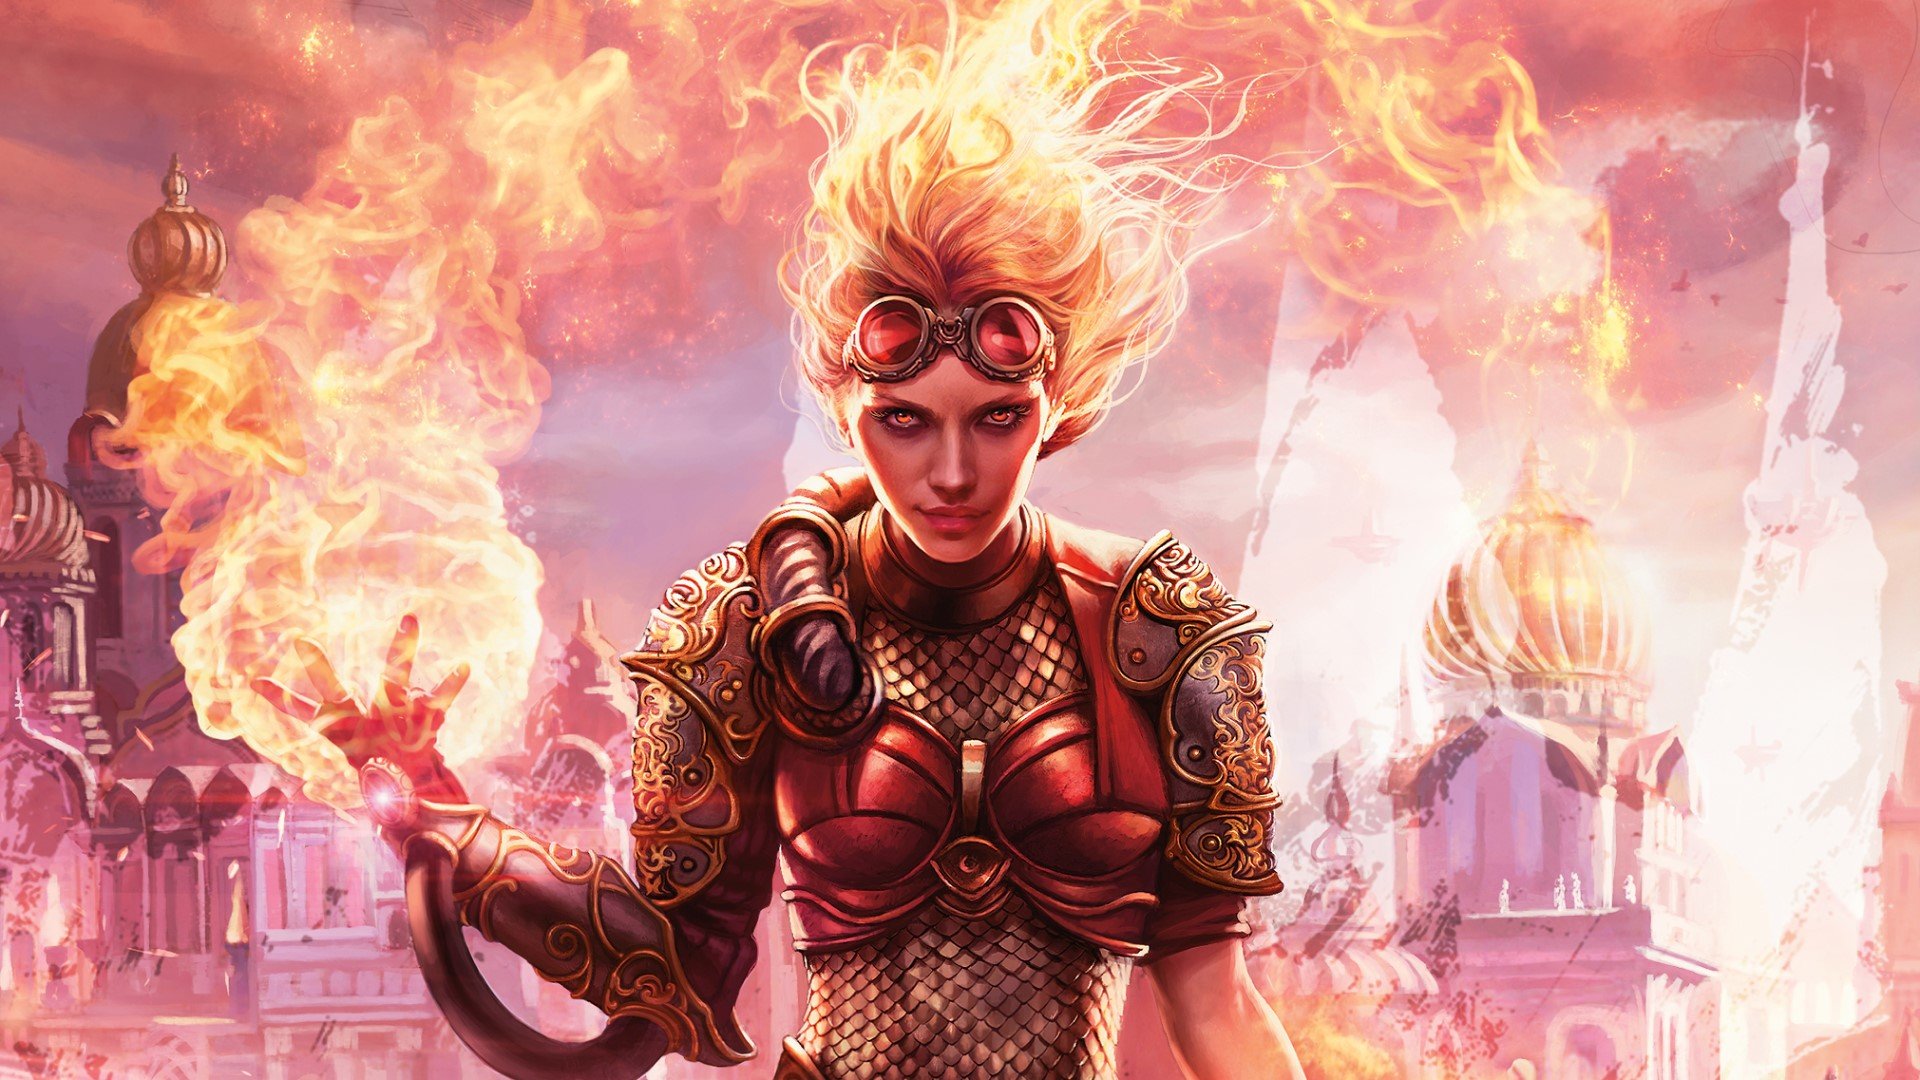 MTG colors - Wizards of the Coast art of Chandra, a planeswalker with flaming hair